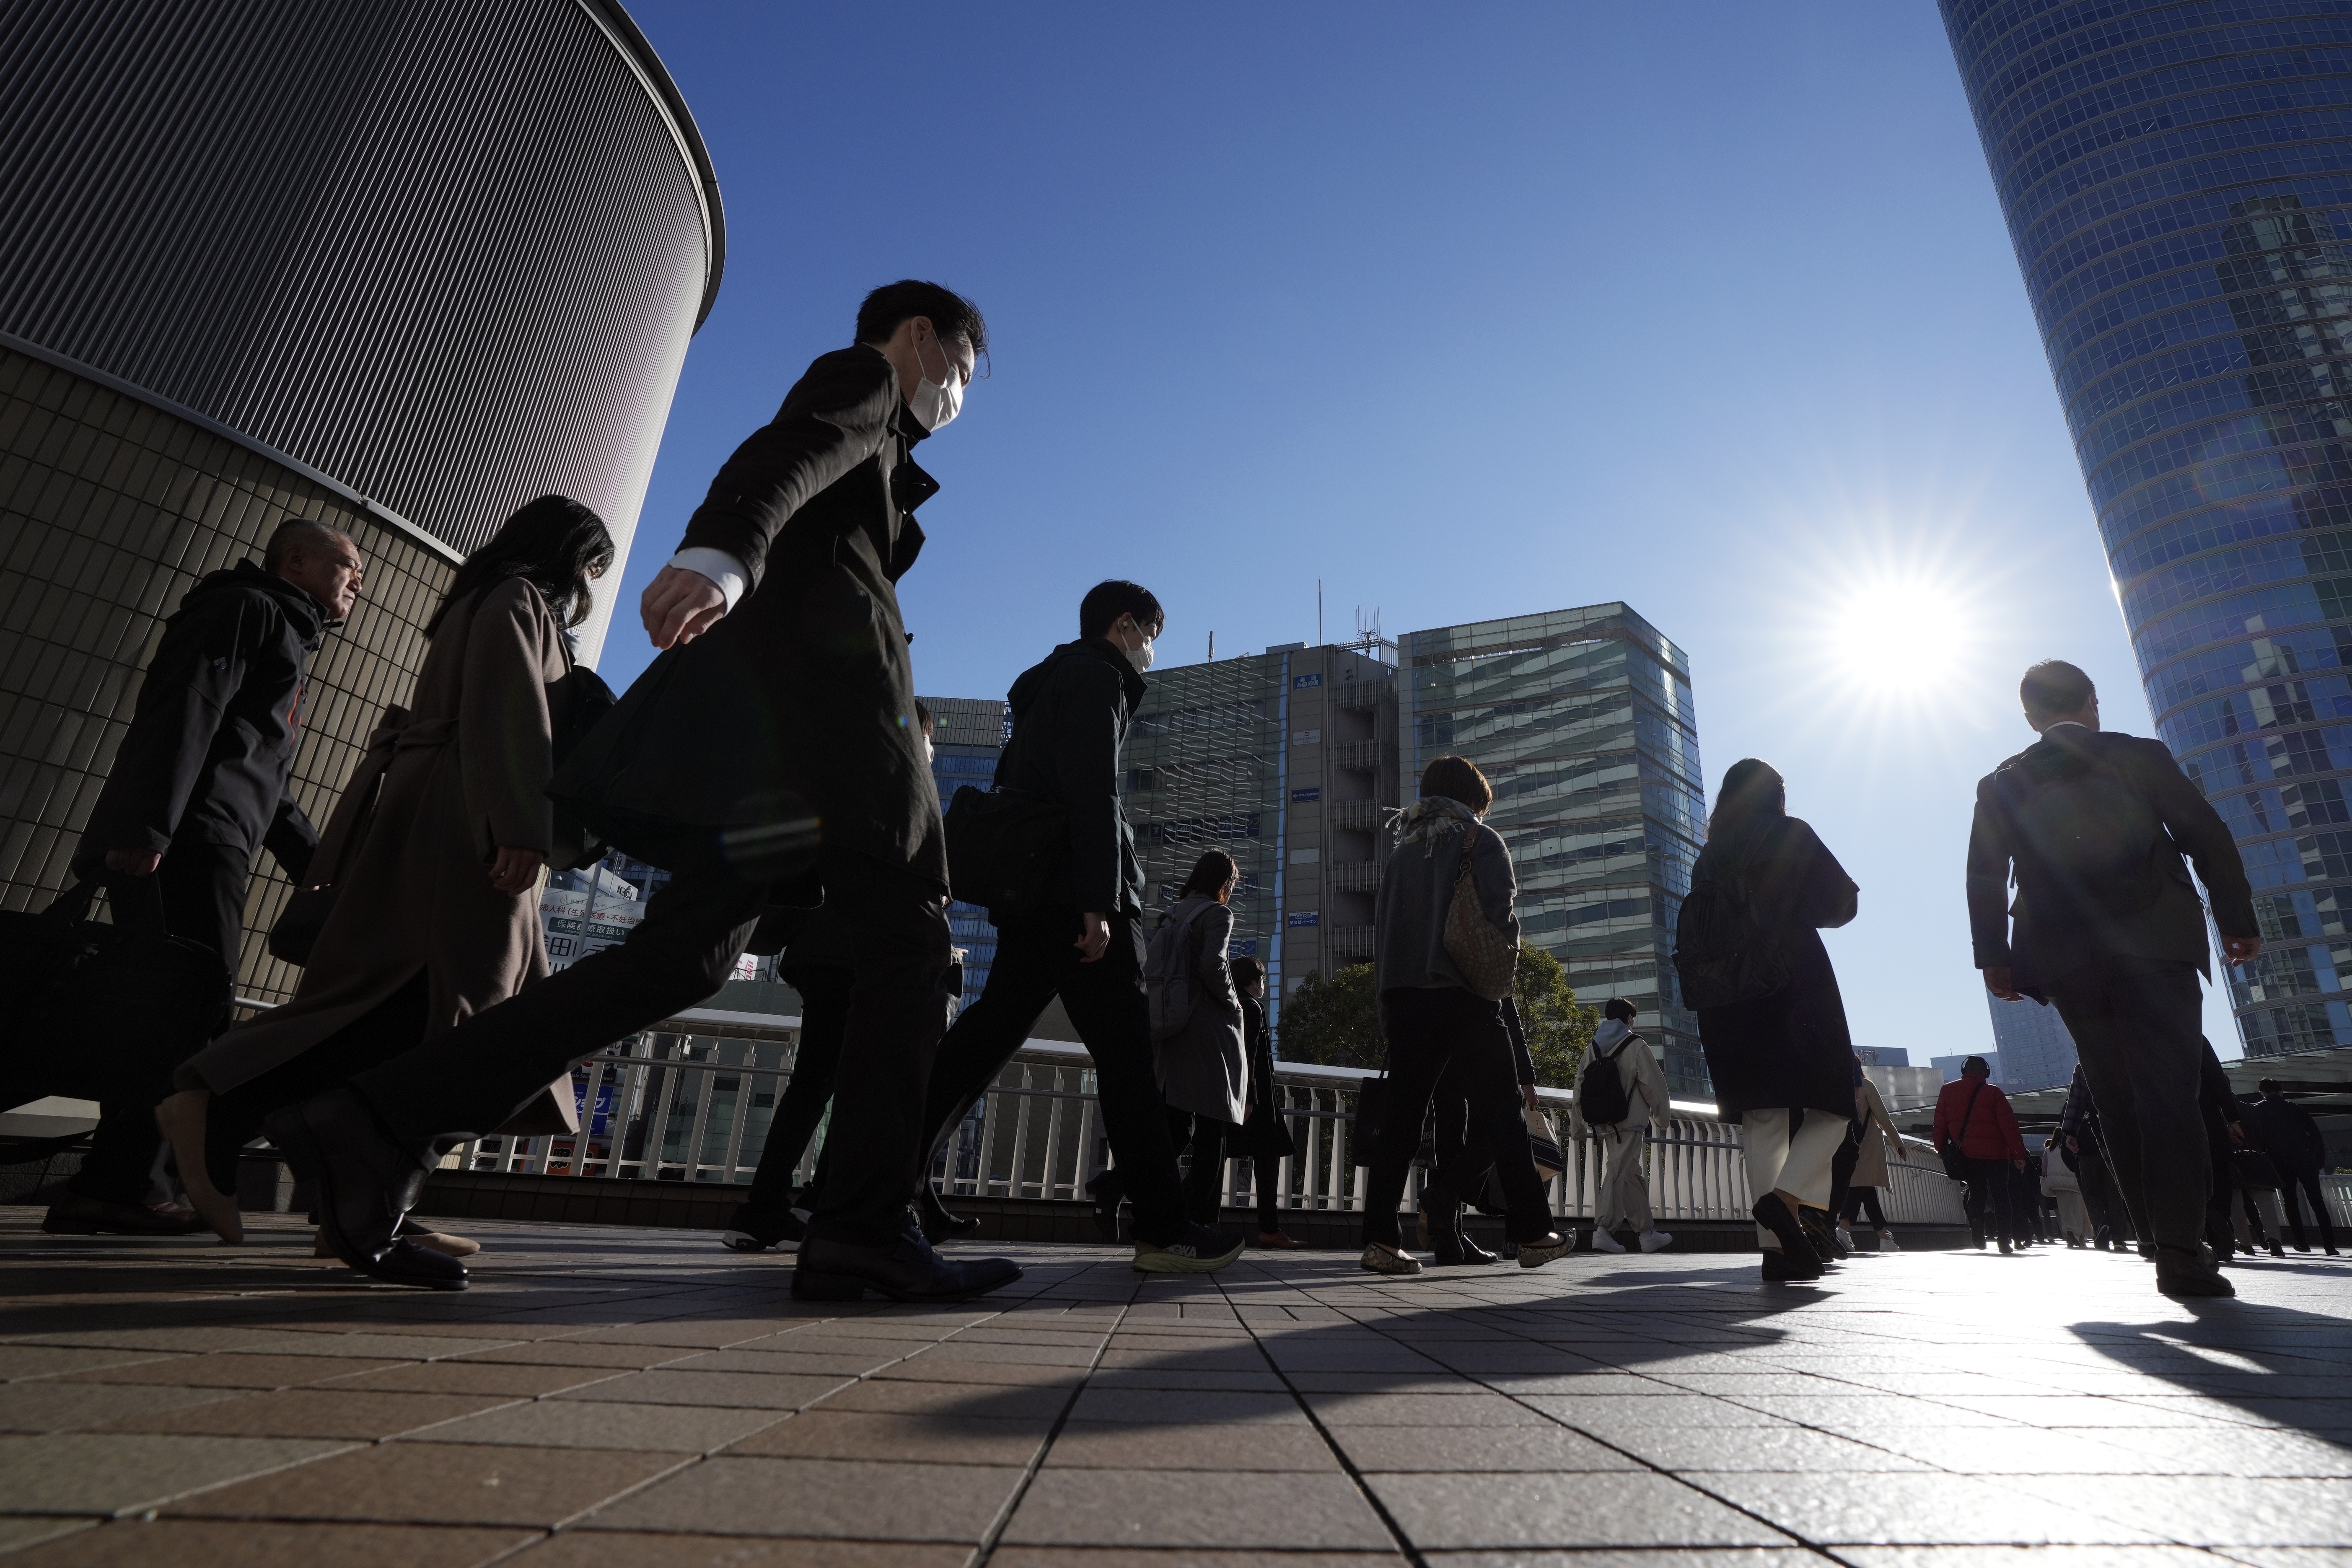 Japan’s economy narrowly escapes recession as growth figures are revised for the better